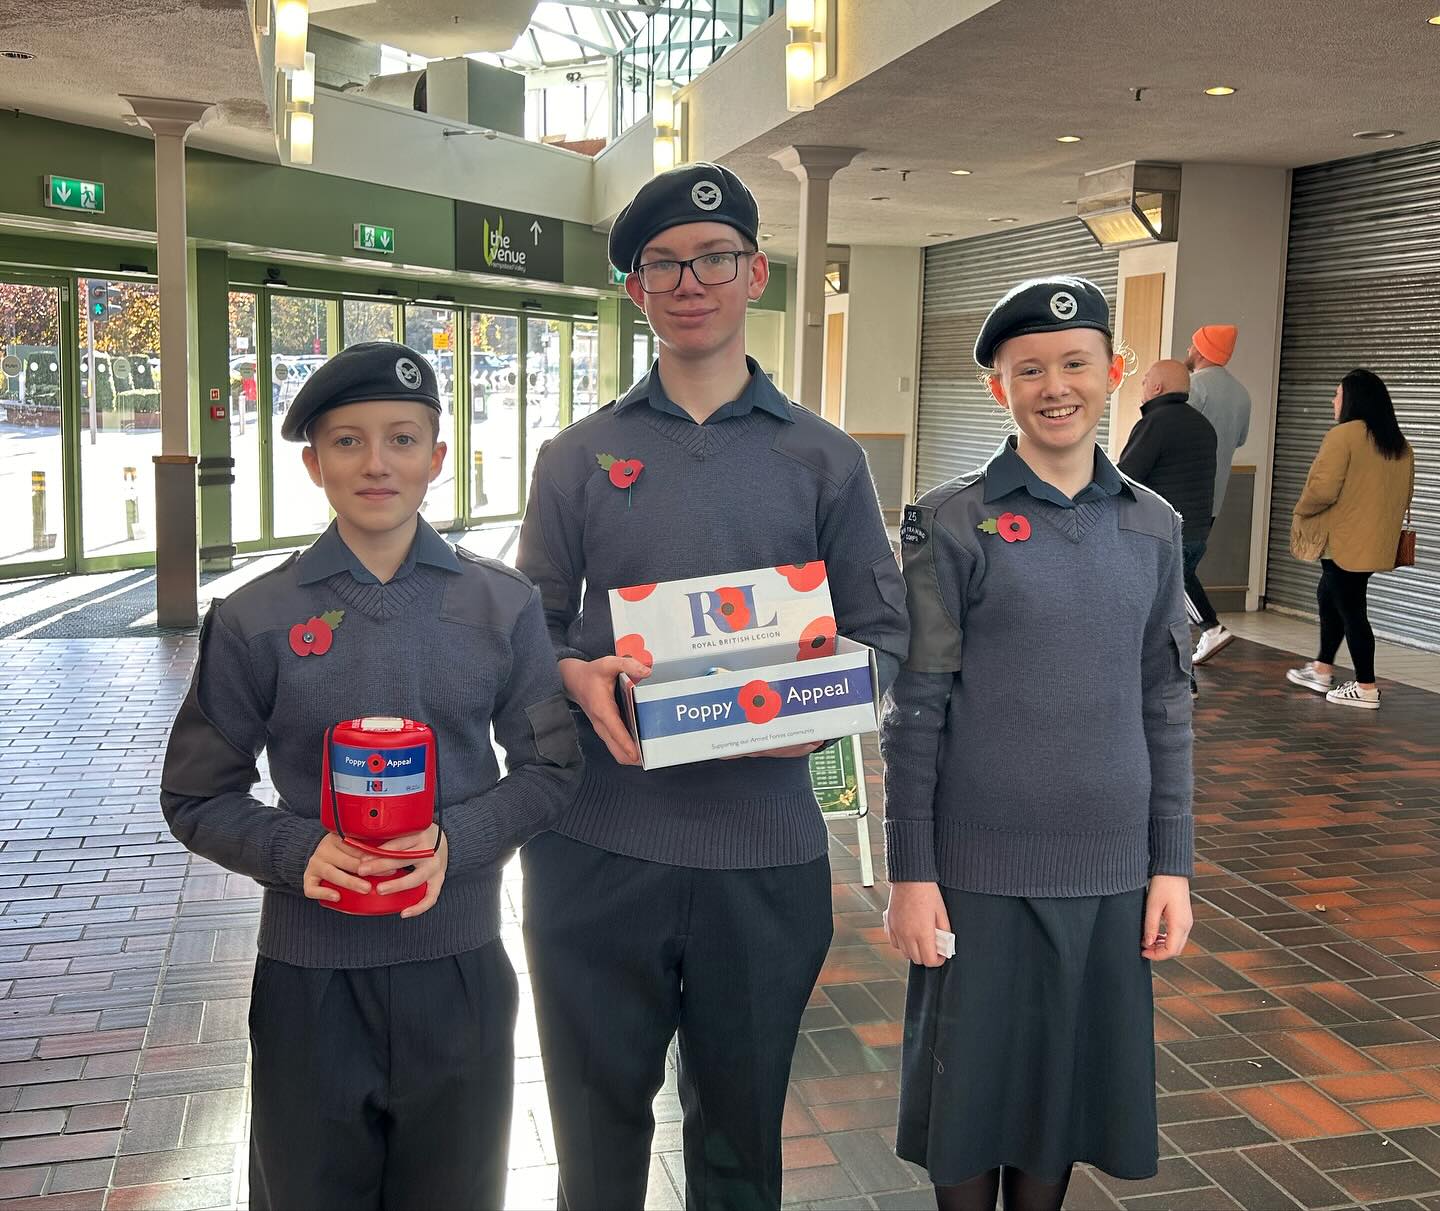 Air Cadets getting ready to sell poppies in a shopping centre